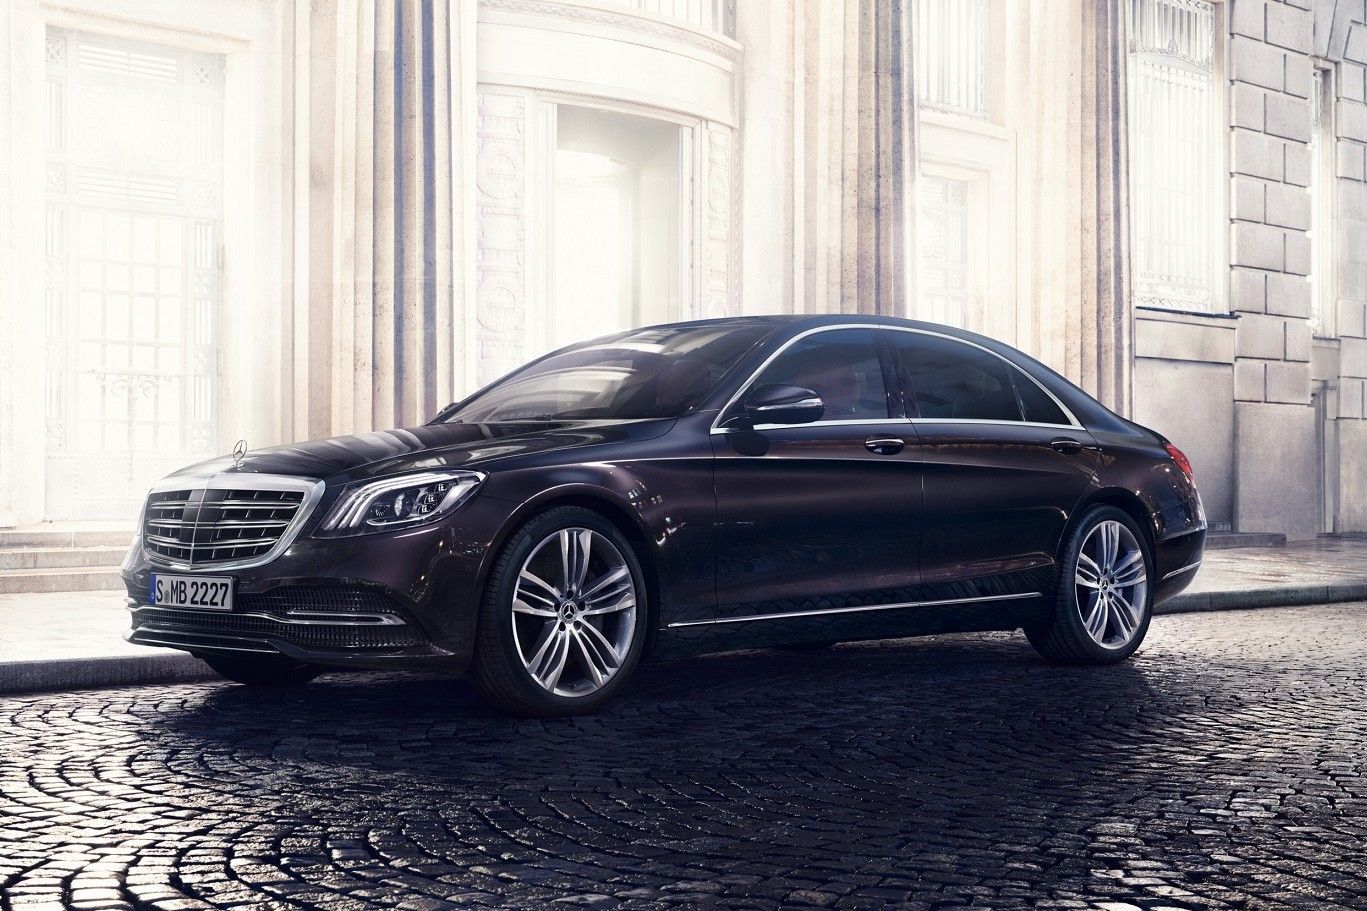 Mercedes Benz S Class Price In Kochi November 2020 On Road Price Of S Class